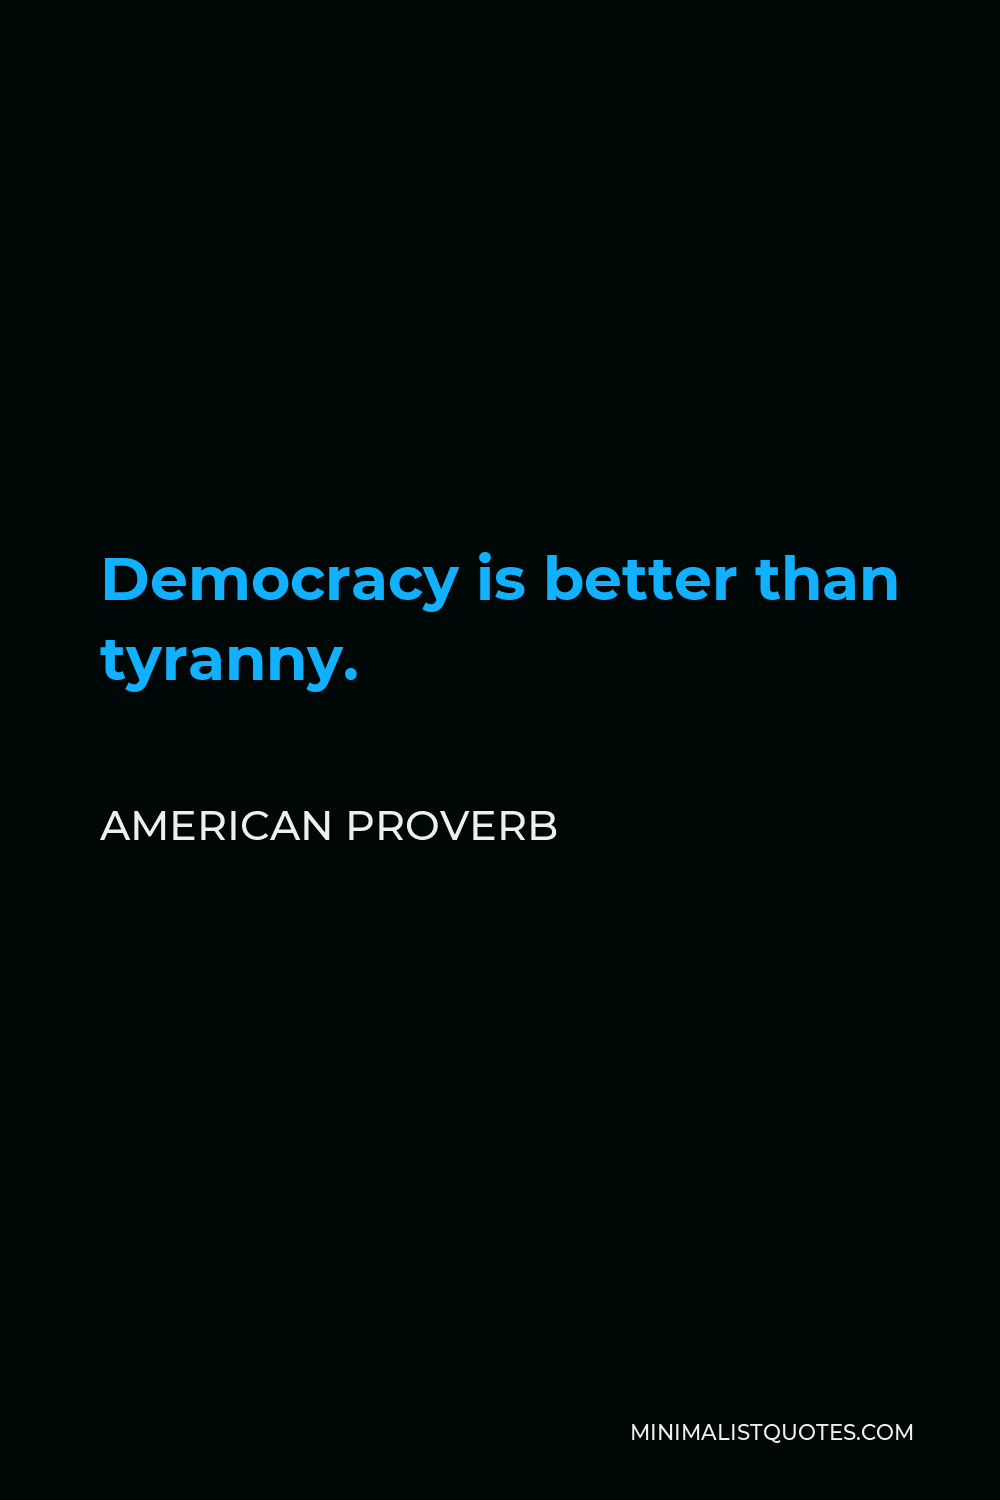 American Proverb Quote - Democracy is better than tyranny.